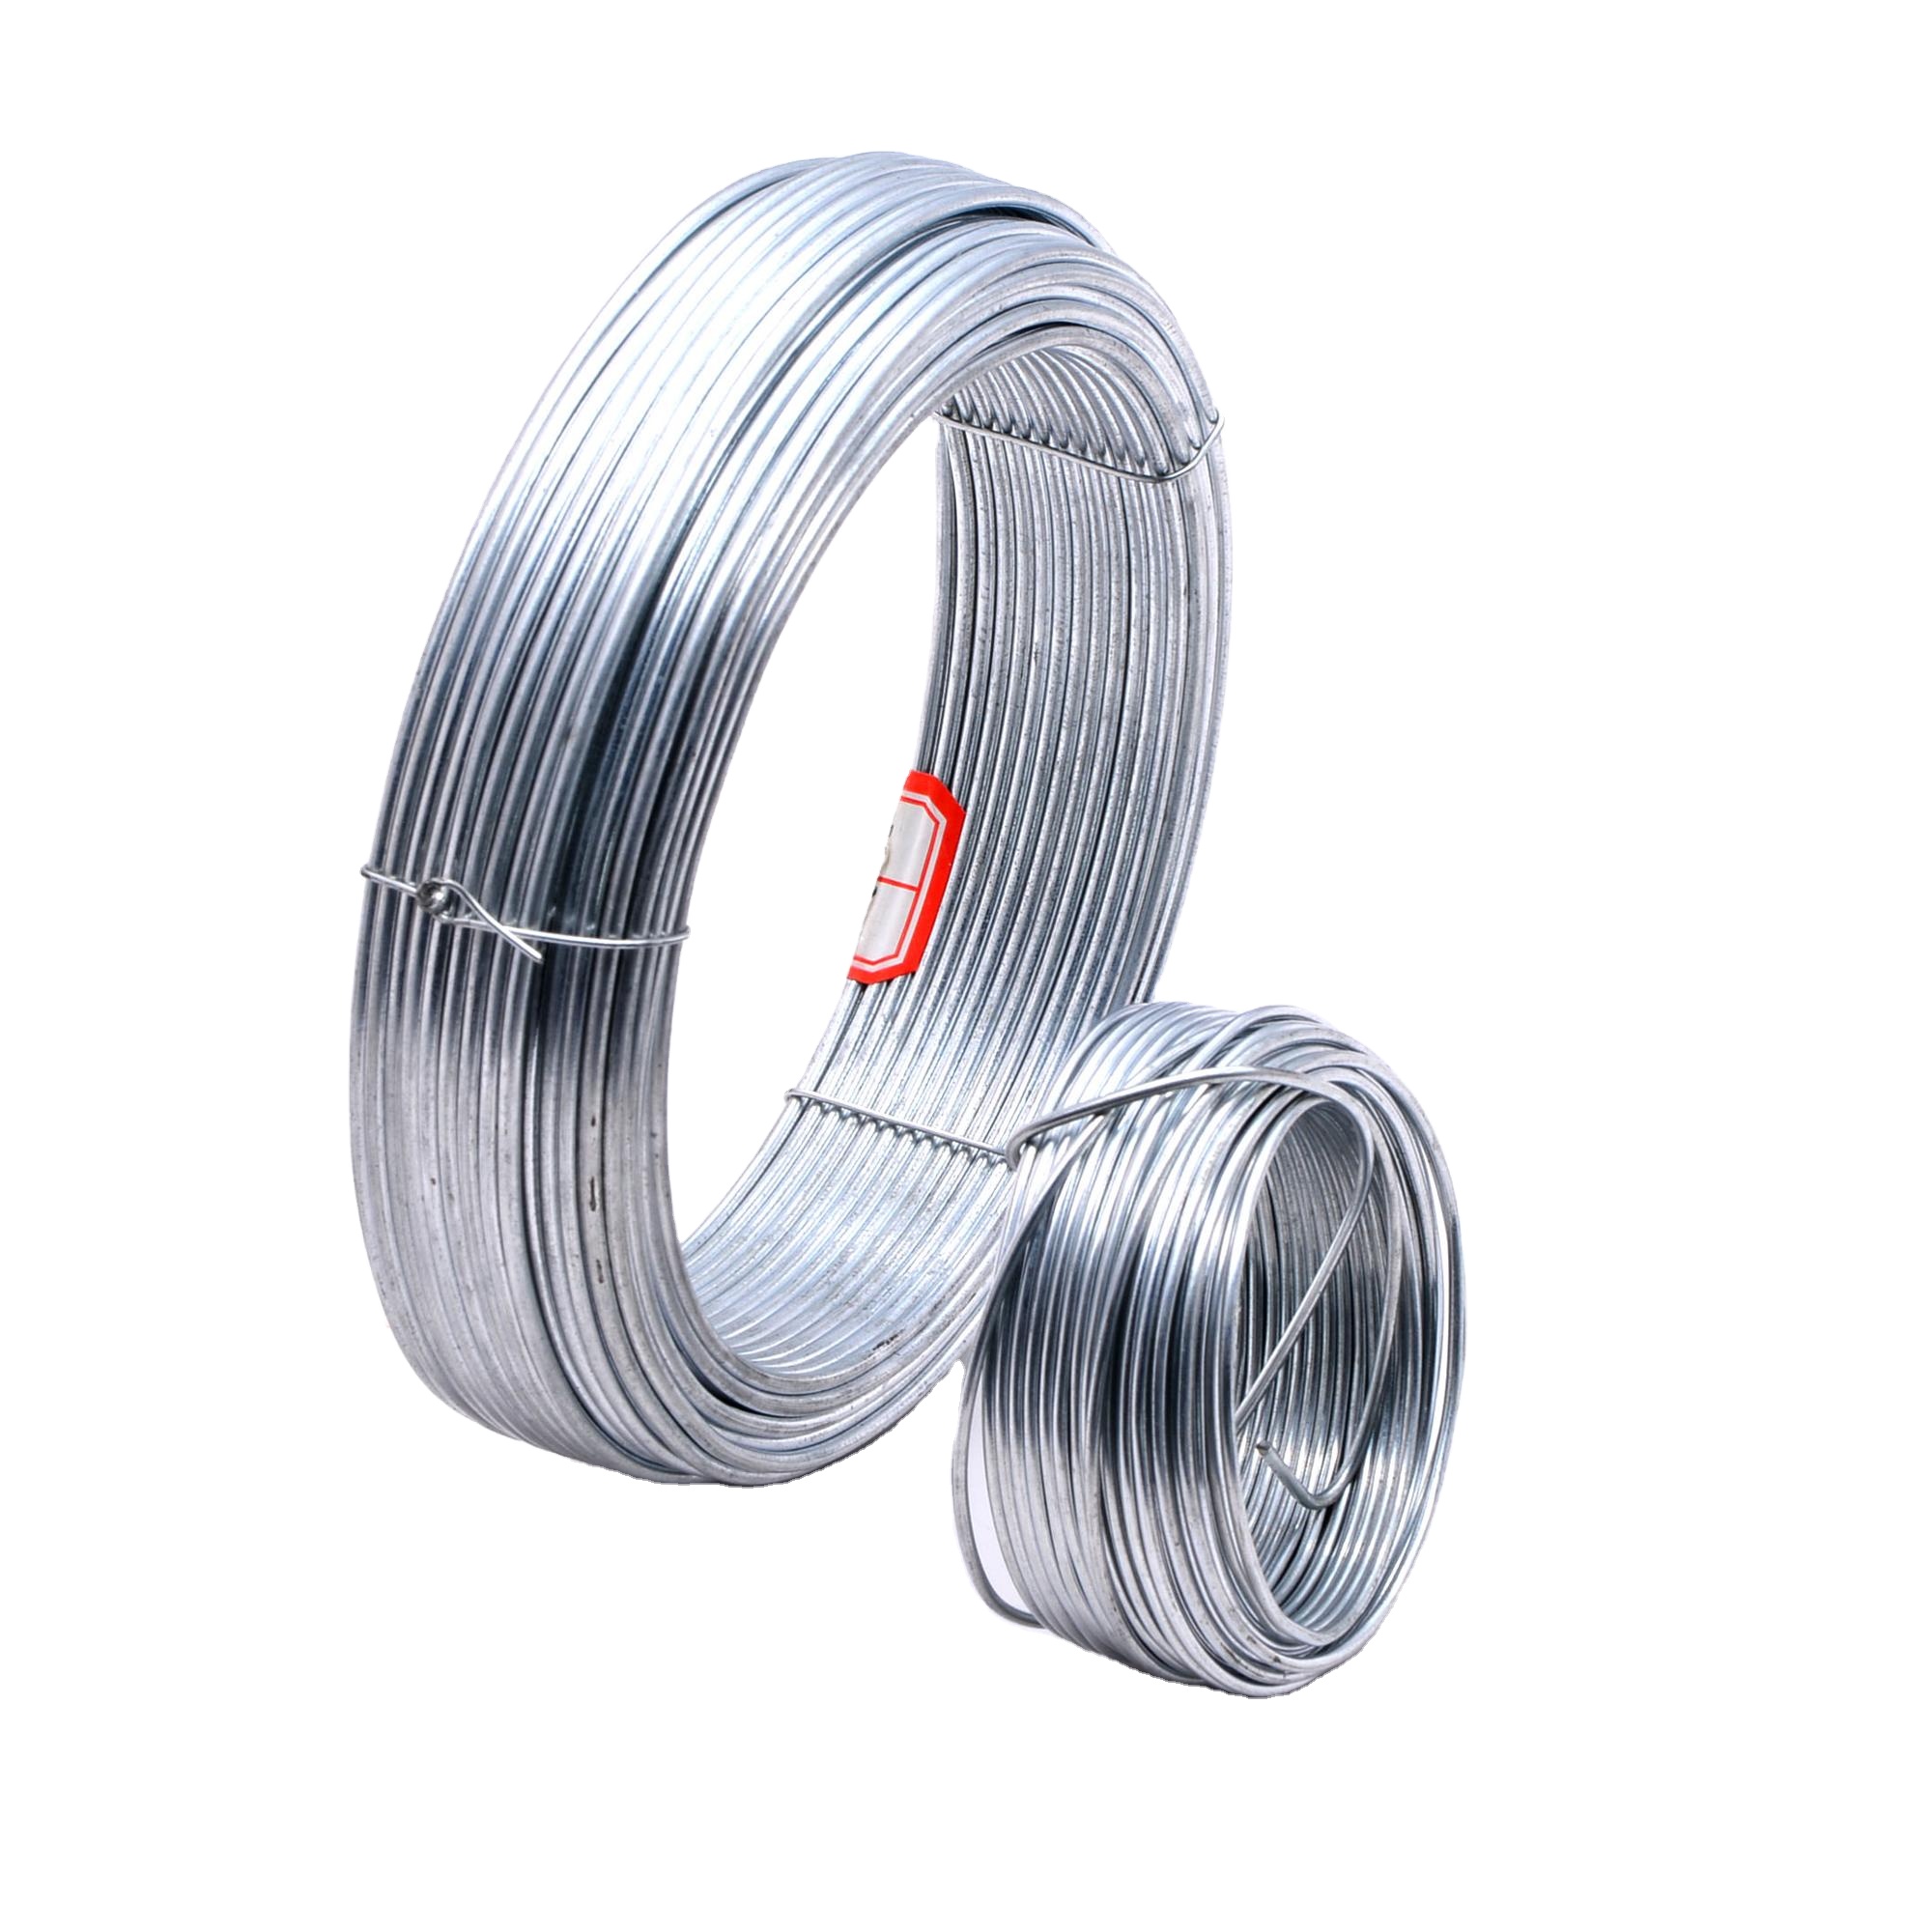 China supplier galvanized wire production line best quality galvanized wire 1mm